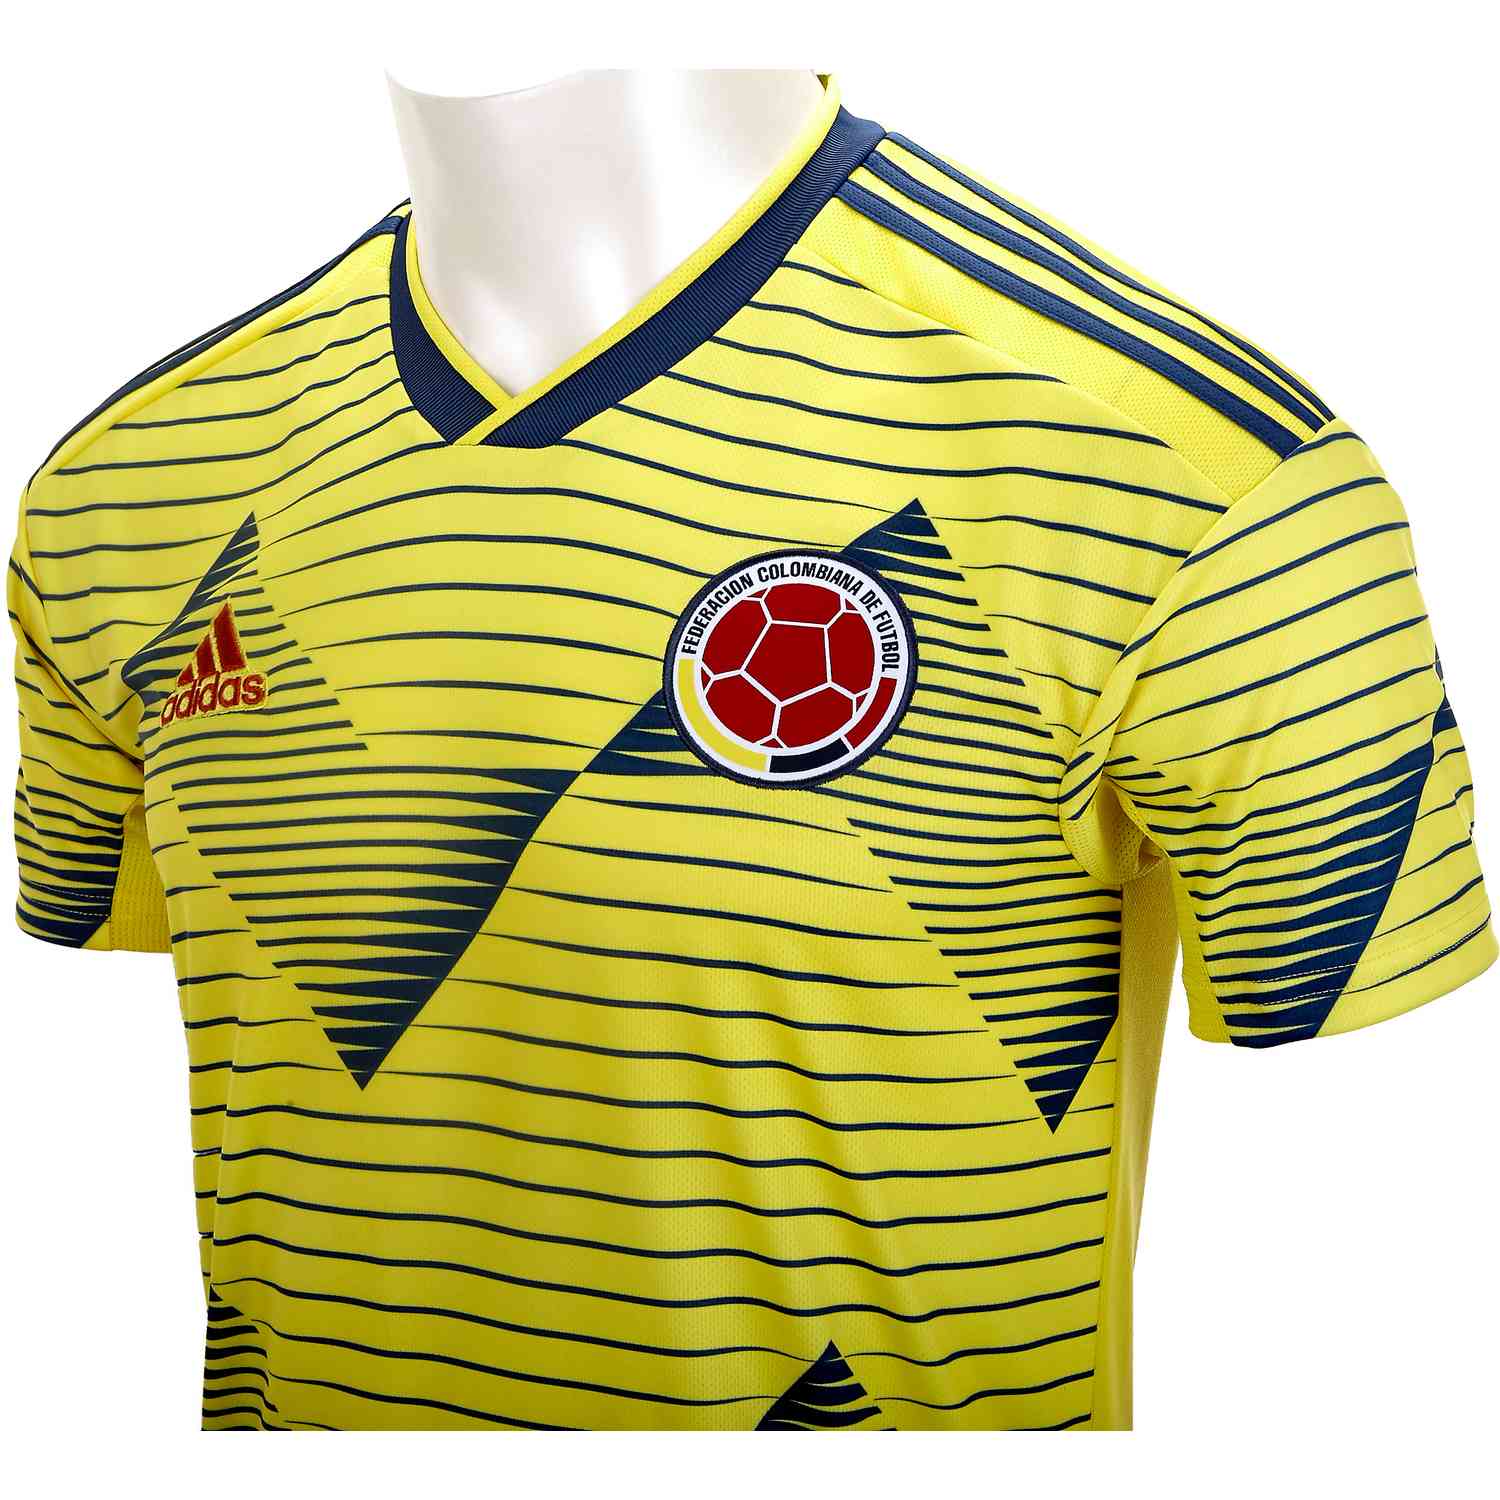 Adidas Colombia National Team Jersey Shirt Blue Soccer Size Small